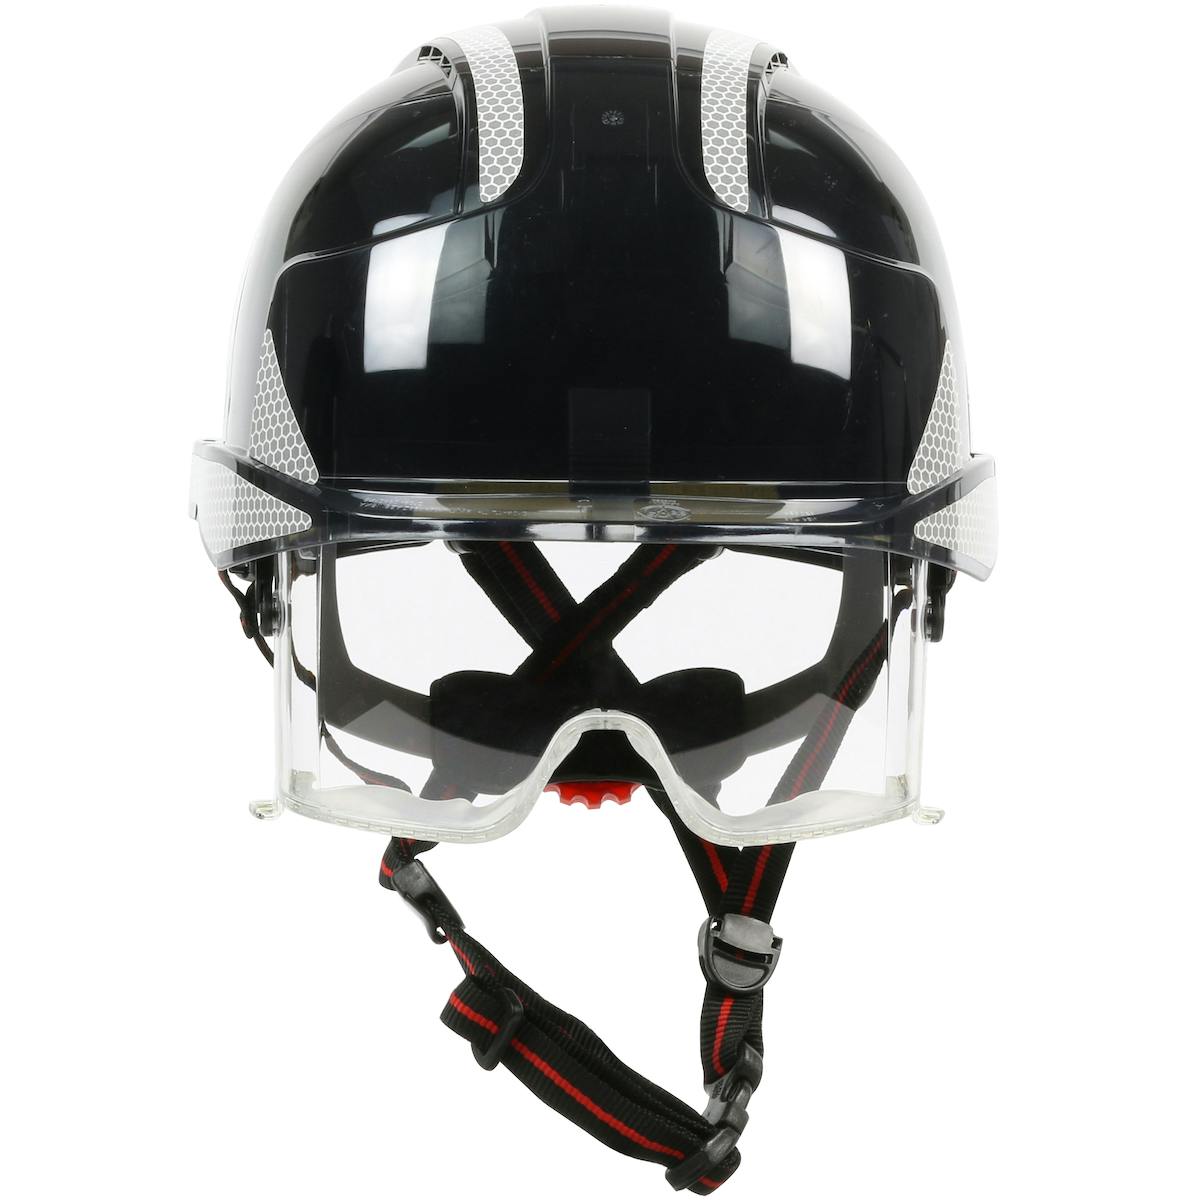 EVO® VISTA™ ASCEND™ Type I, Vented Industrial Safety Helmet with fully adjustable four point chinstrap, Lightweight ABS Shell, Integrated ANSI Z87.1 Eye Protection, 6-Point Polyester Suspension and Wheel Ratchet Adjustment (280-EVLV-CH)_1